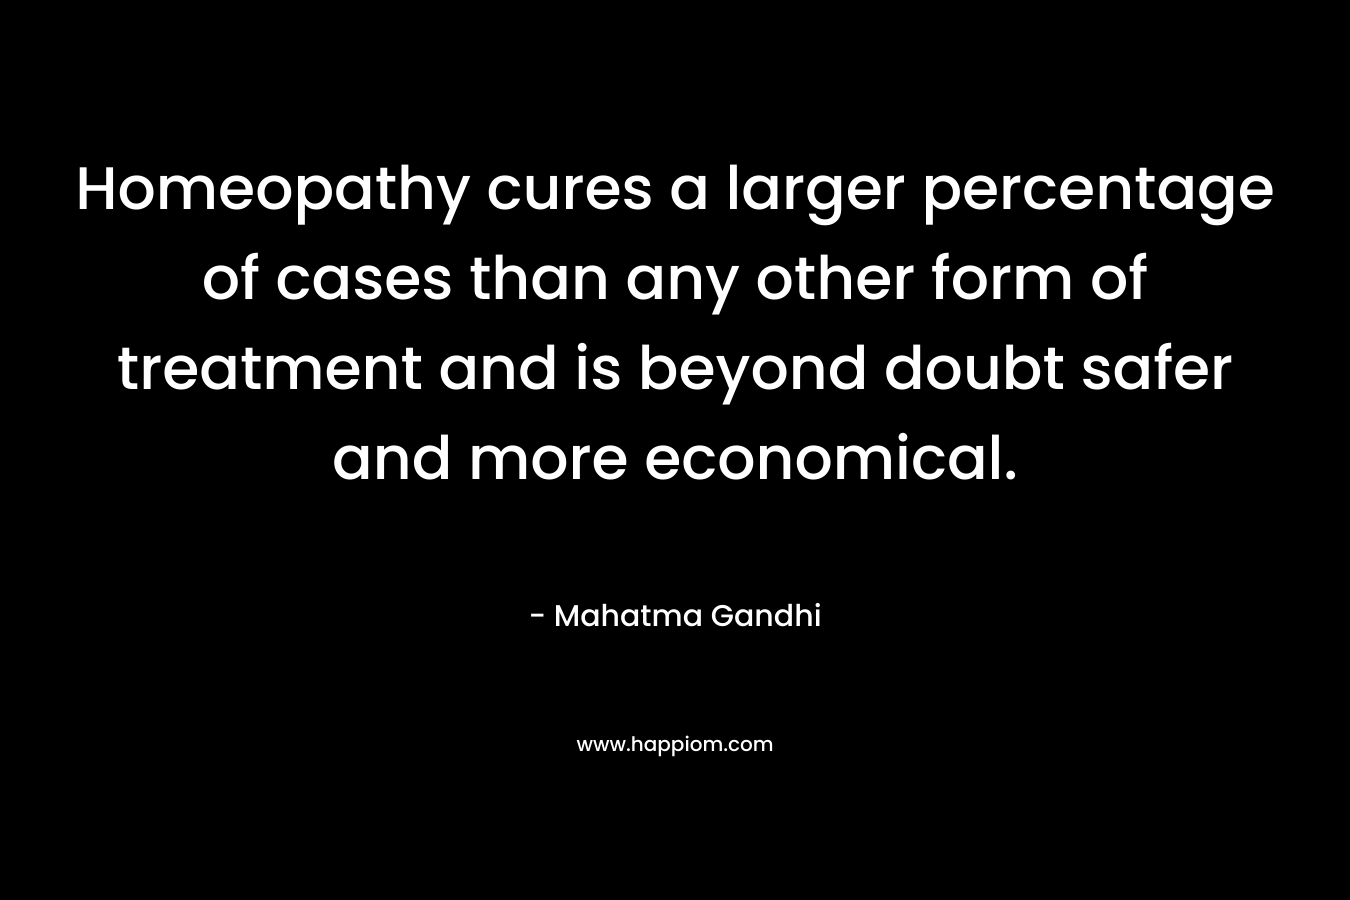 Homeopathy cures a larger percentage of cases than any other form of treatment and is beyond doubt safer and more economical. – Mahatma Gandhi